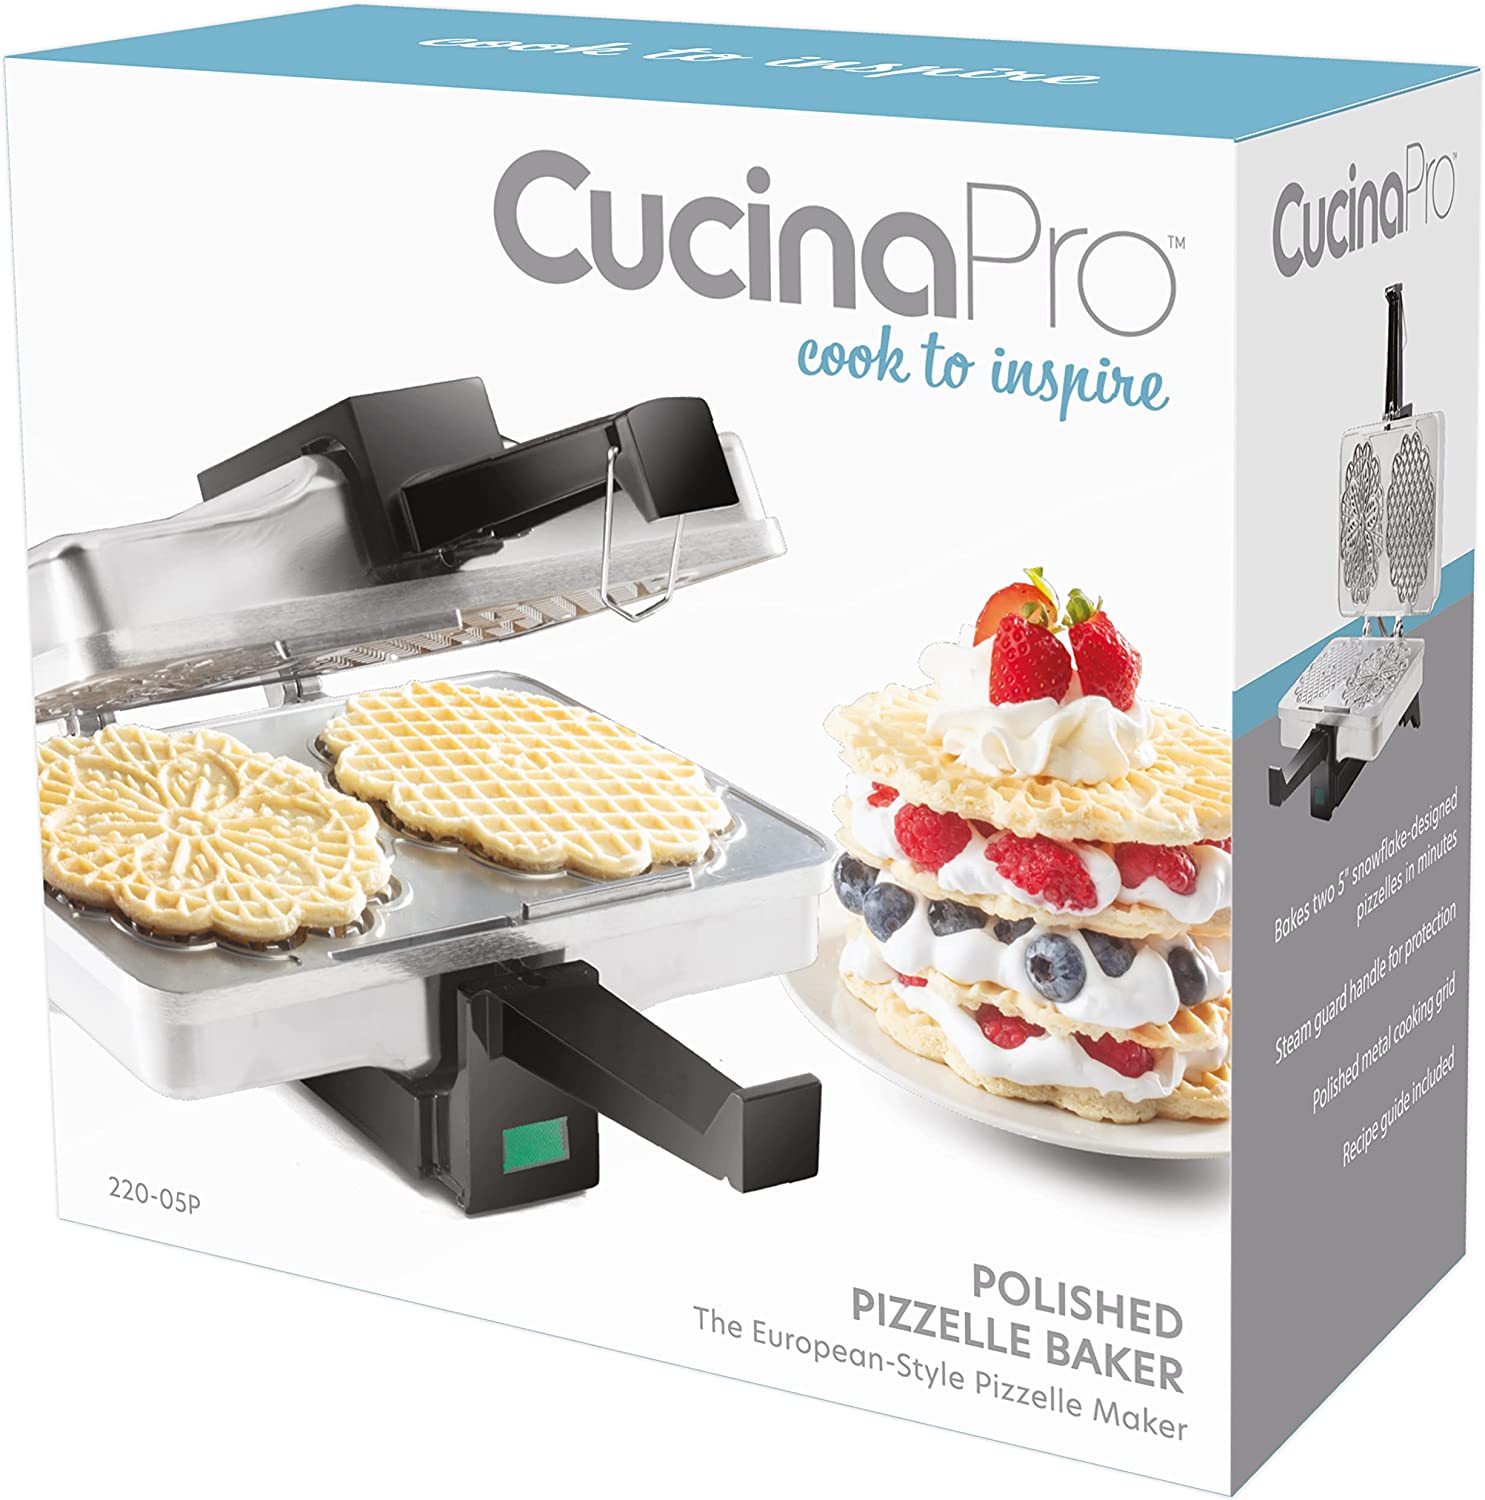 Pizzelle Maker - Polished Electric Baker Press Makes Two 5-Inch Cookies at Once - Recipes Included - image 5 of 5